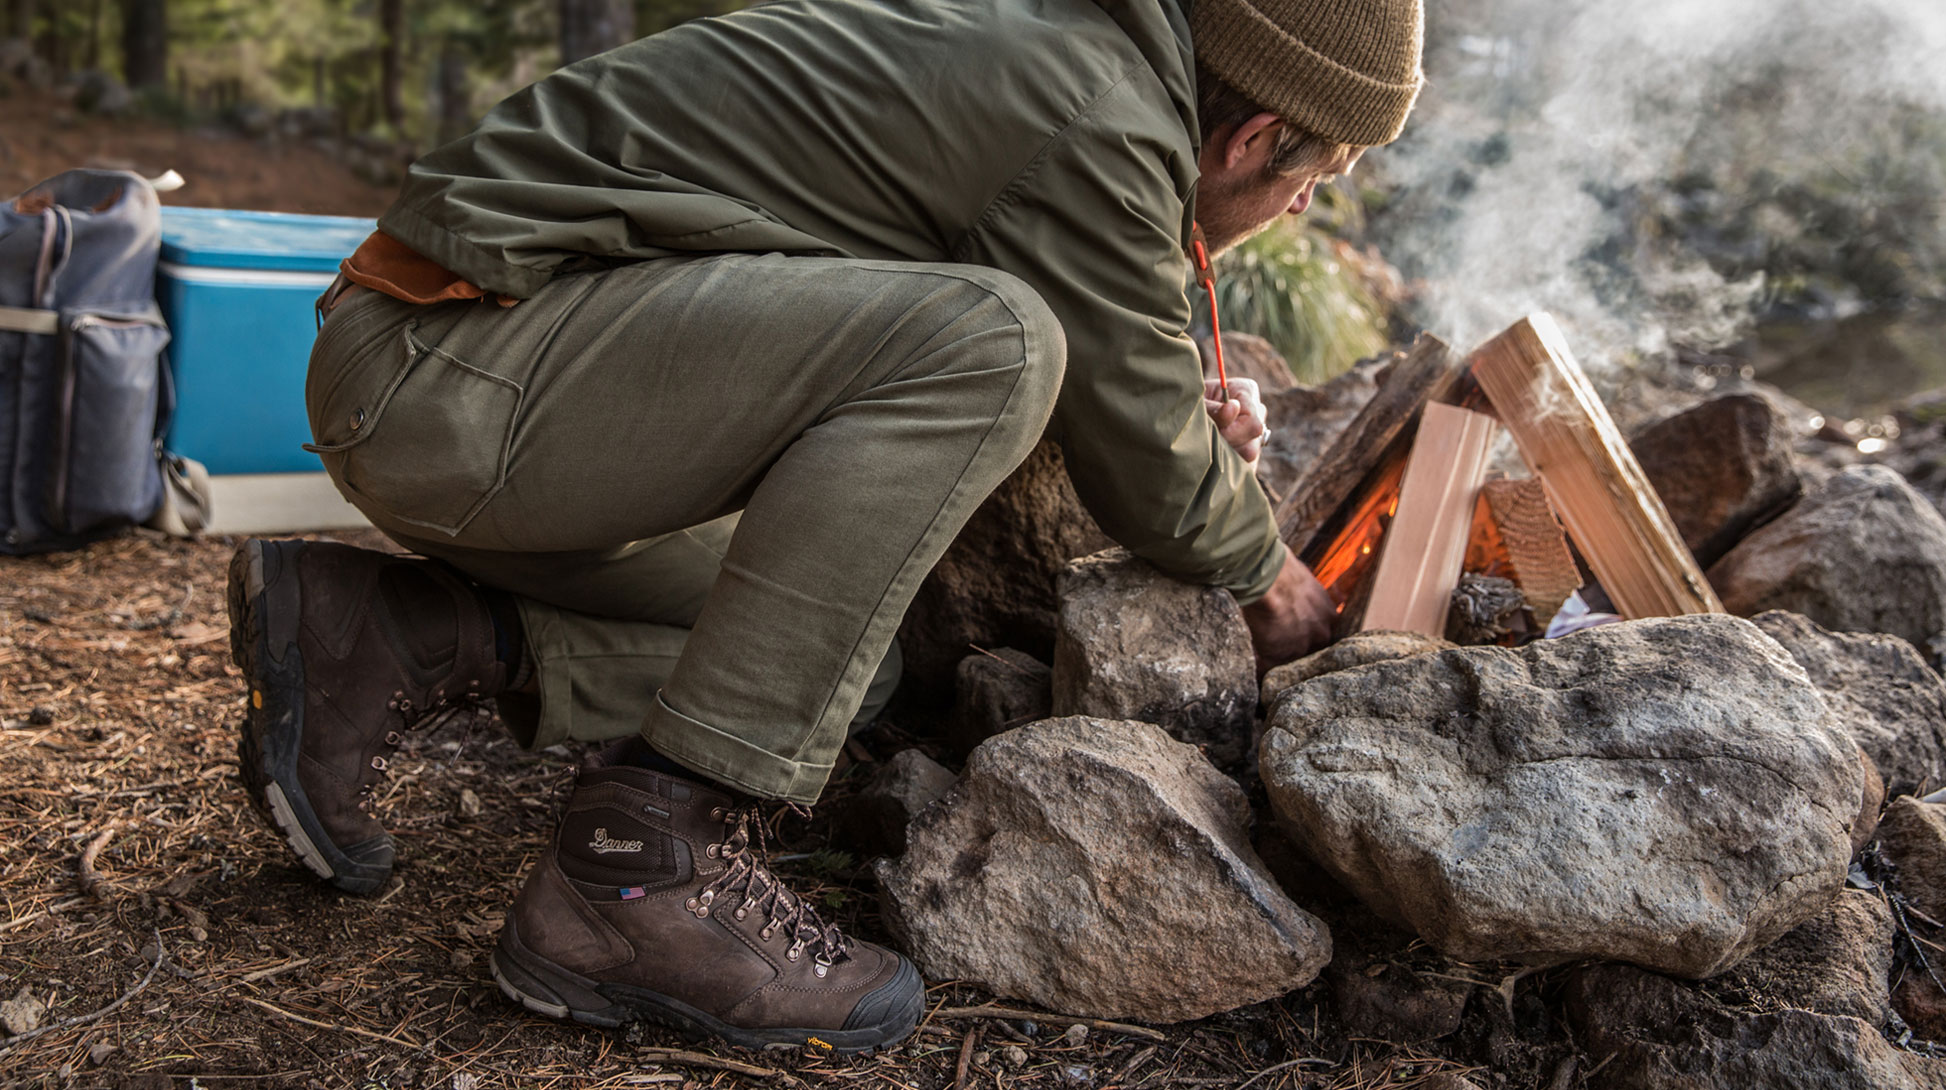 The new Mt. Adams hiking boot from Danner